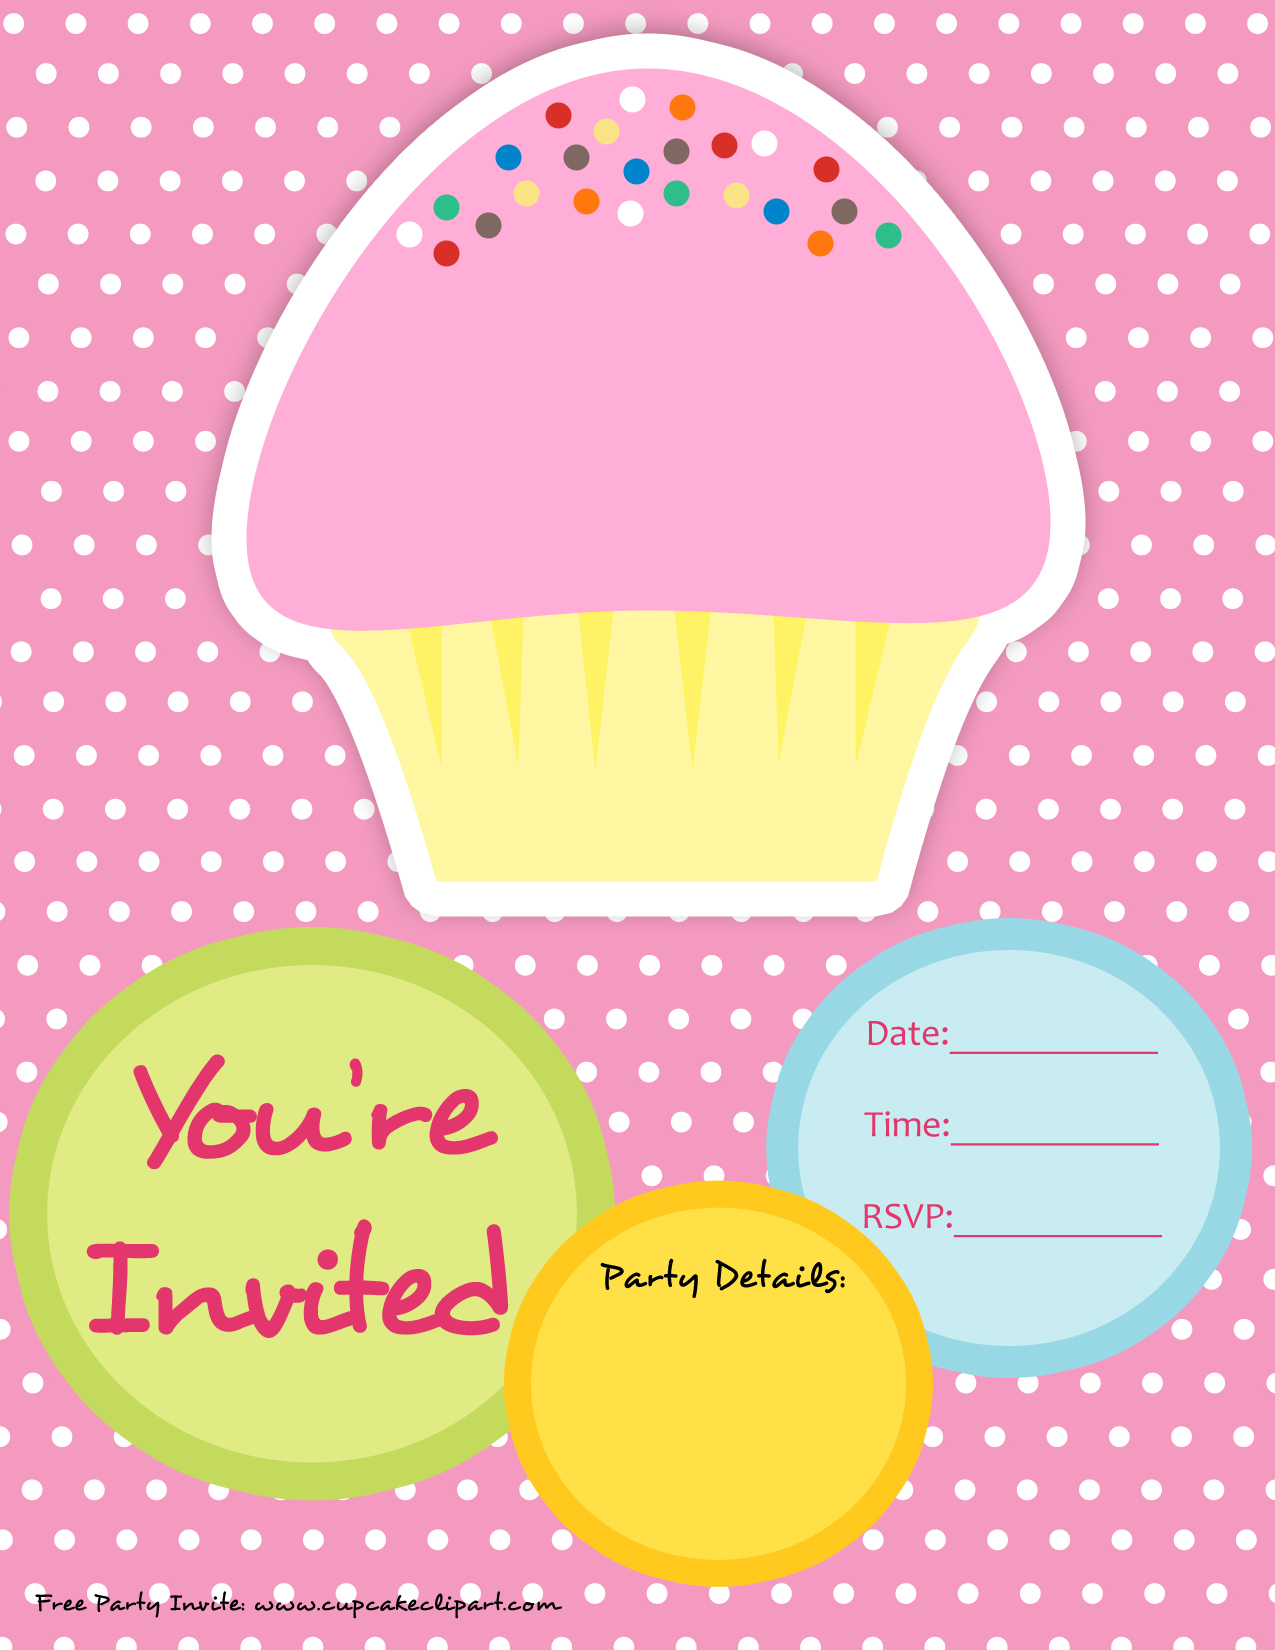 4-best-images-of-cupcake-party-invitations-printable-free-free-printable-cupcake-invitations